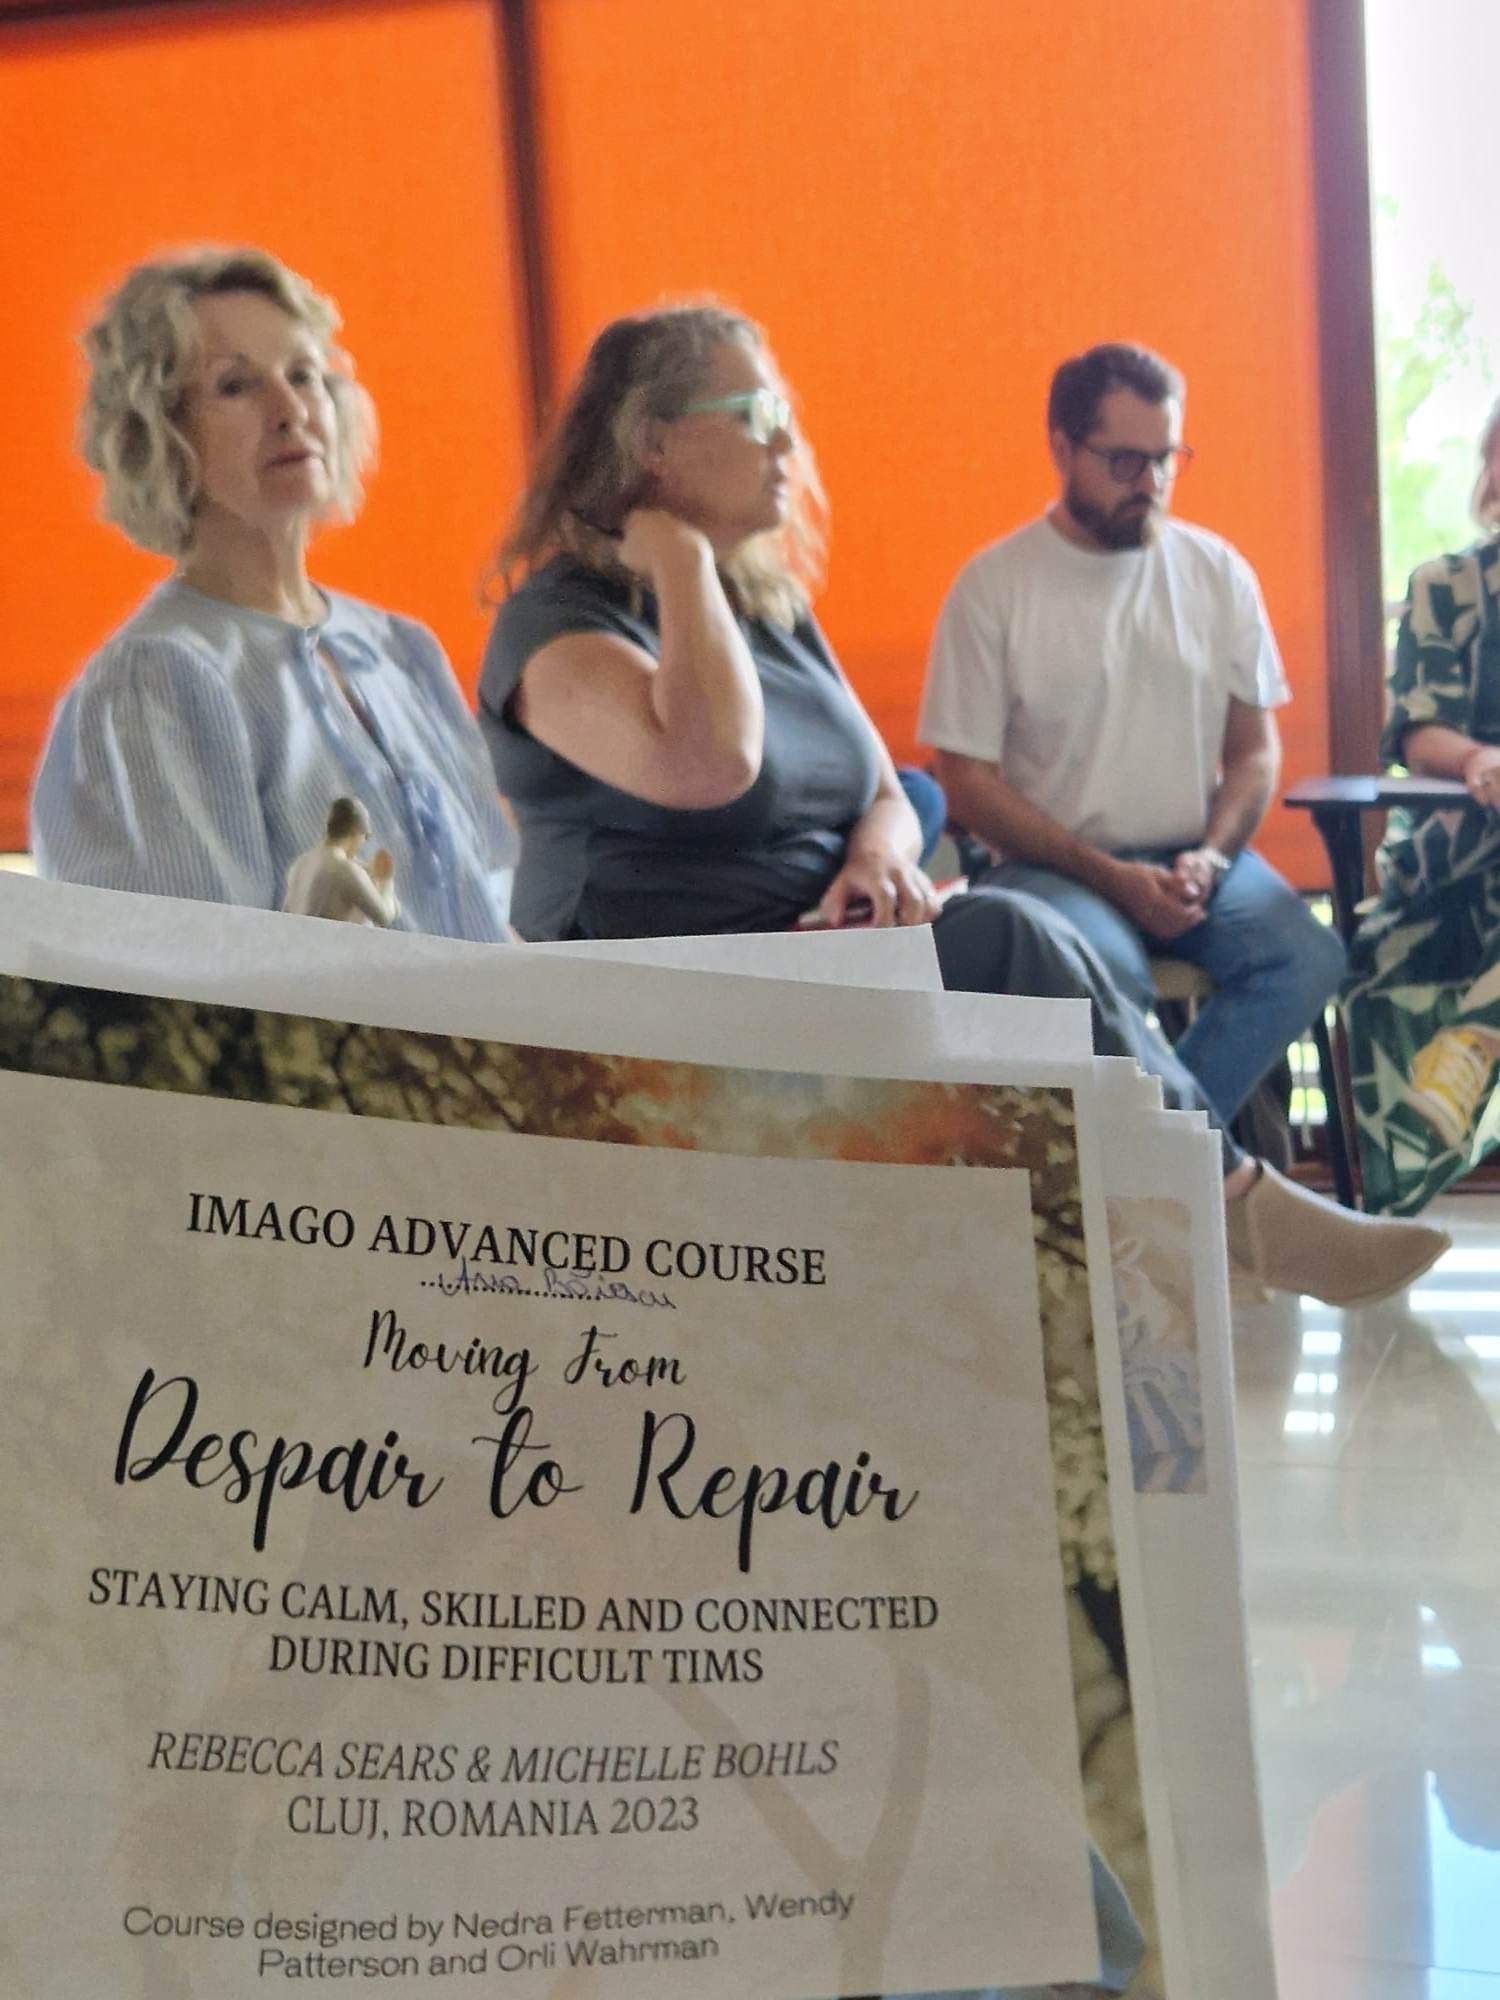 A group of people are sitting in front of a sign that says despair to repair